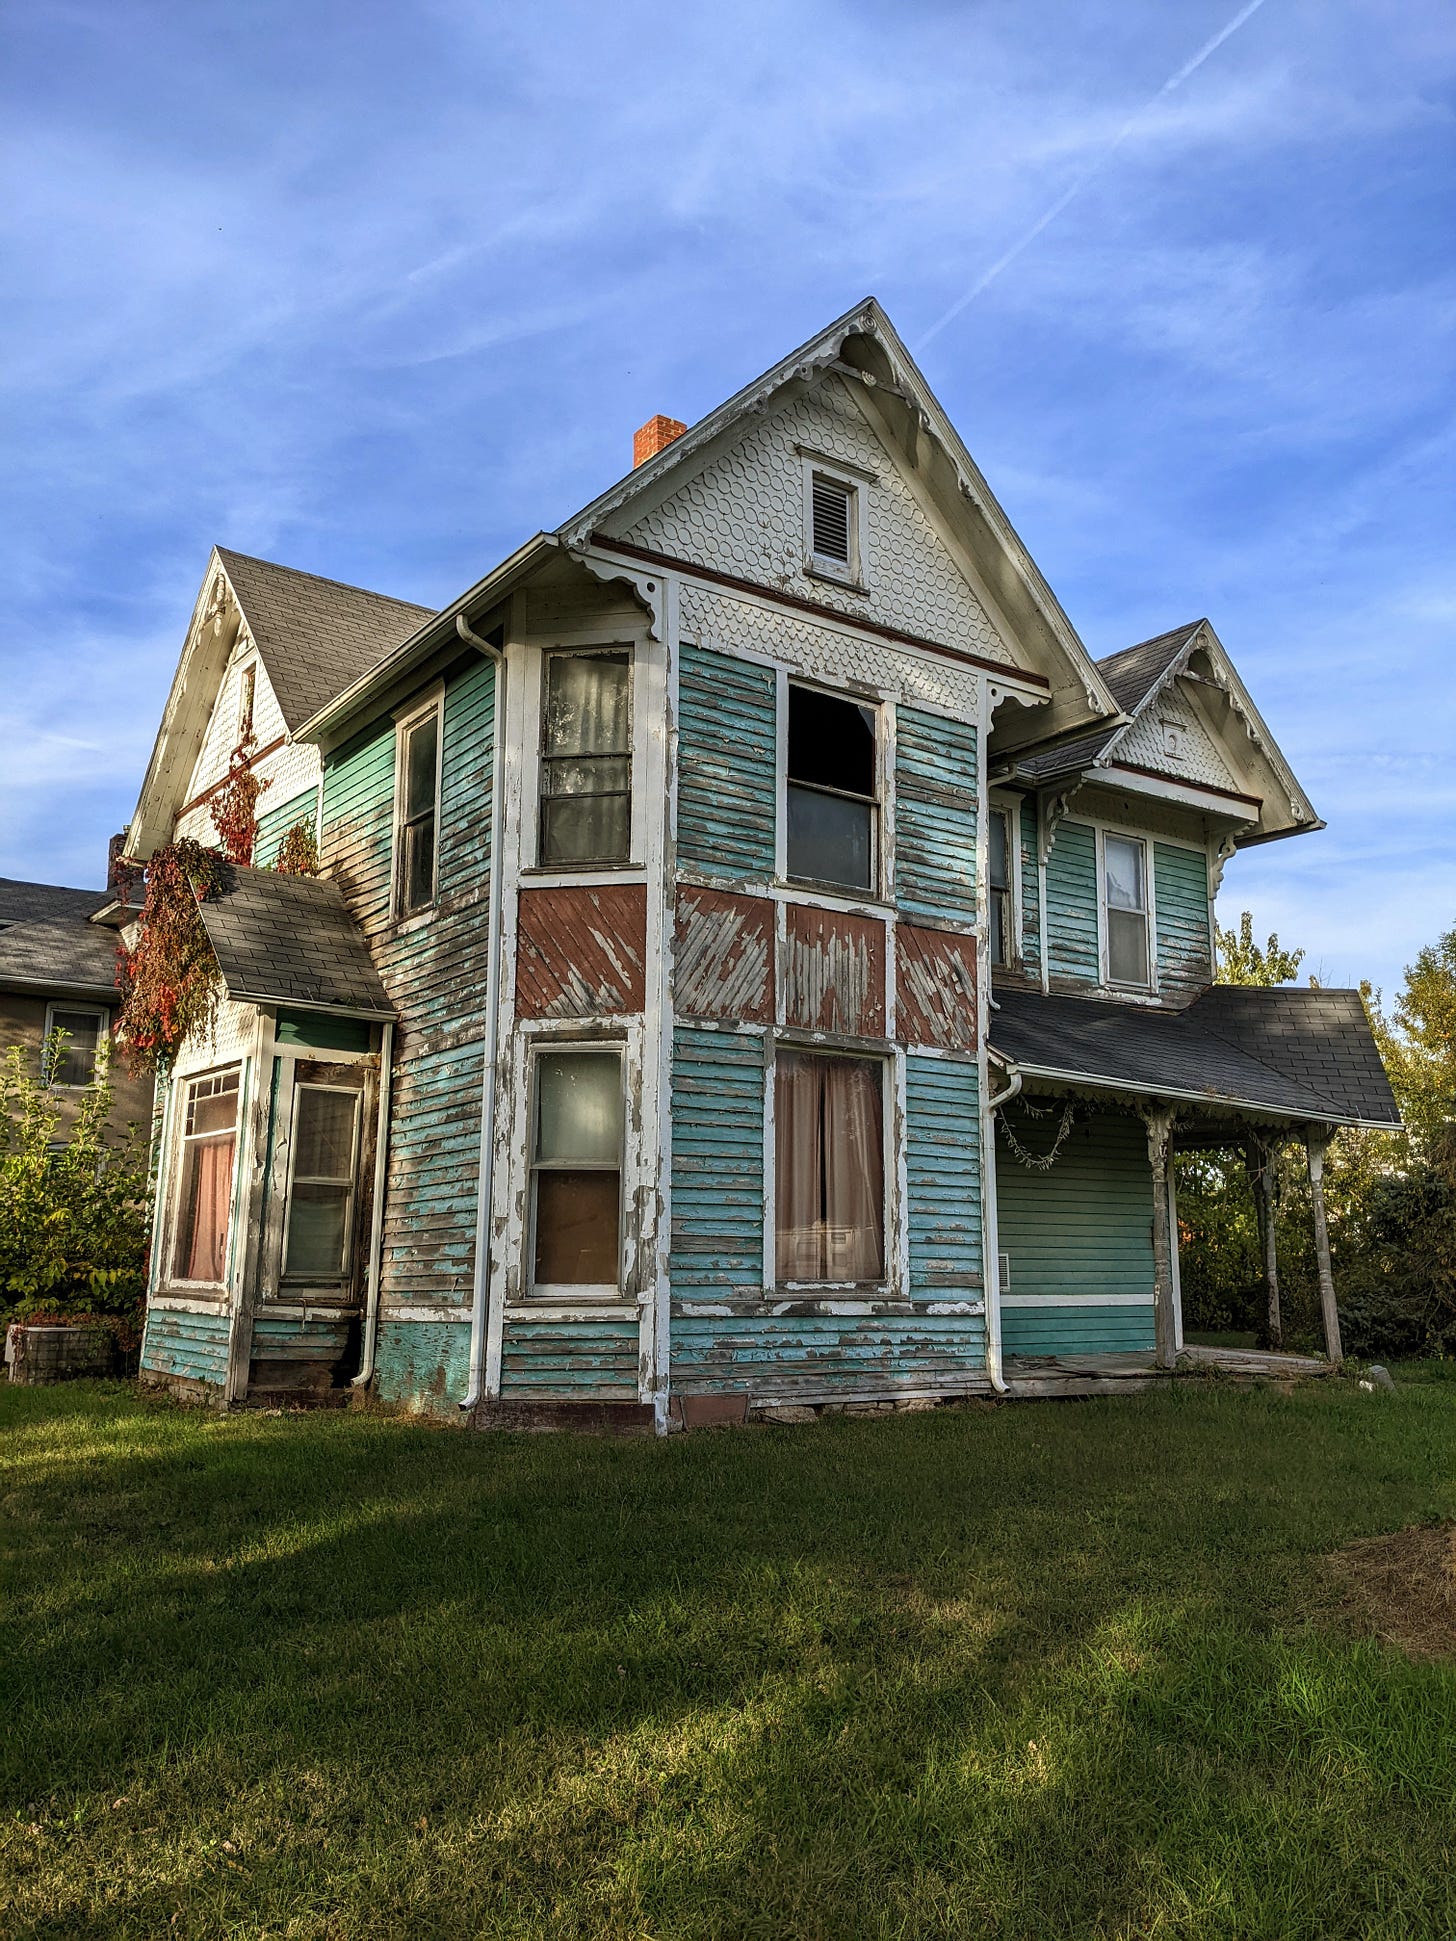 an abandoned two-story house, in classic Queen Anne style